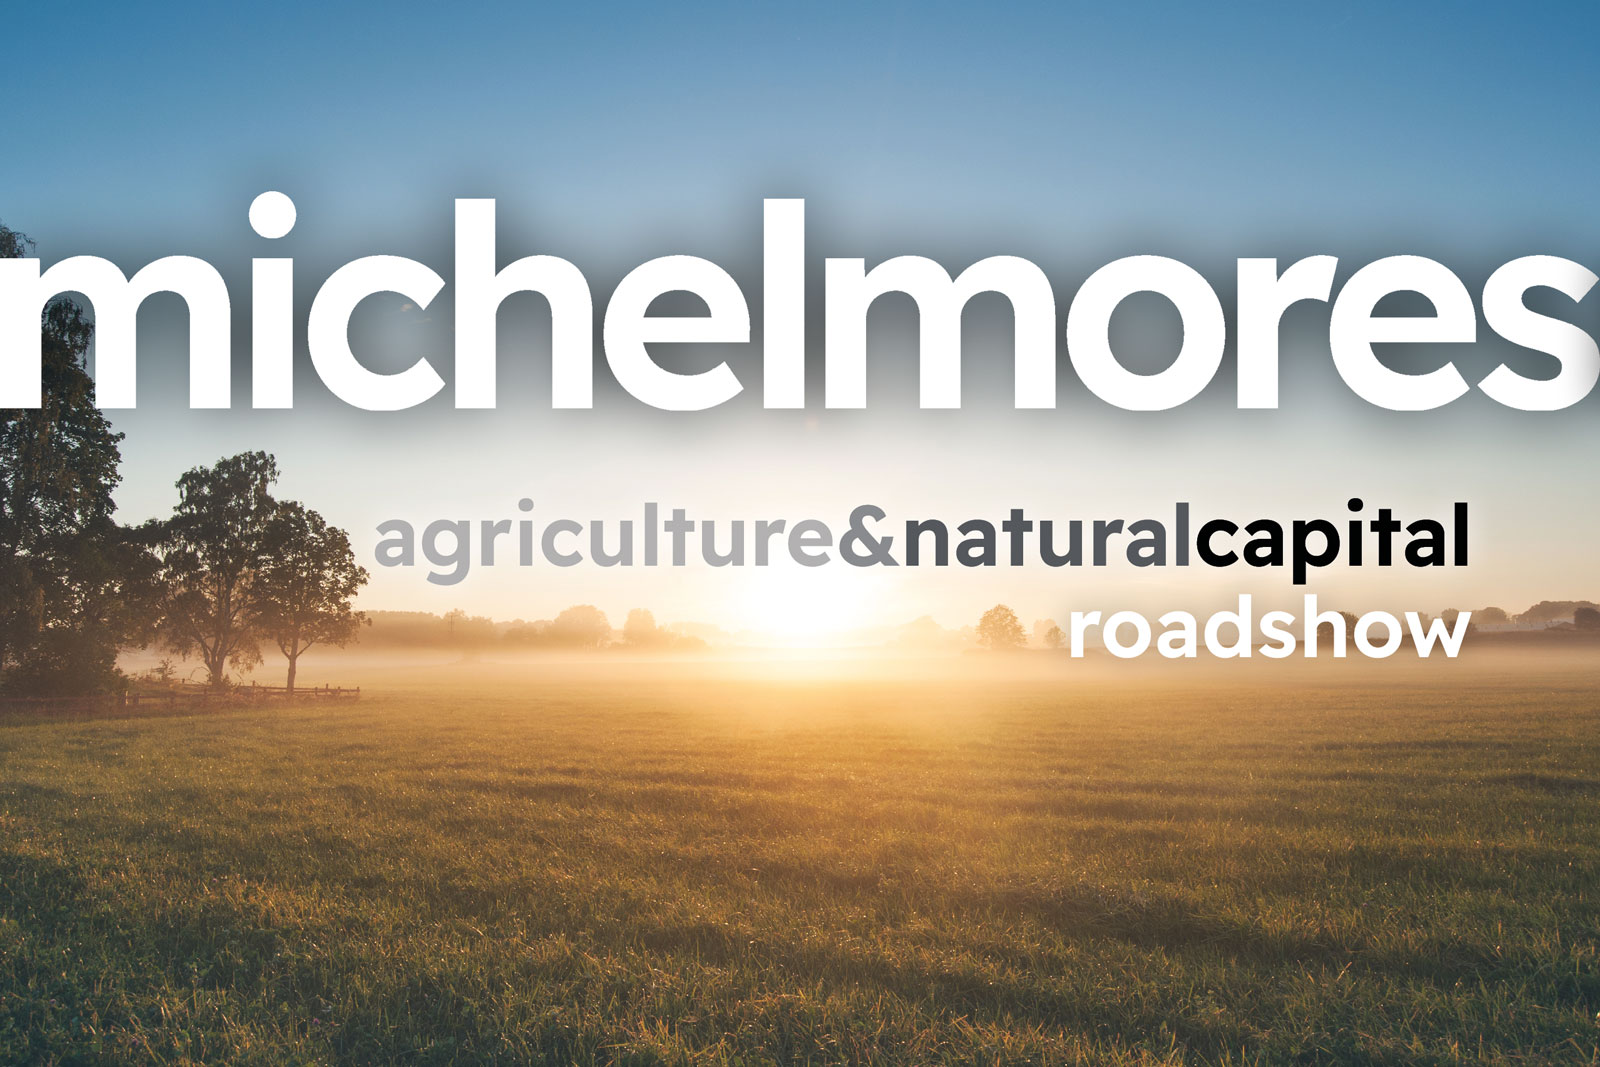 Agriculture and Natural Capital roadshow